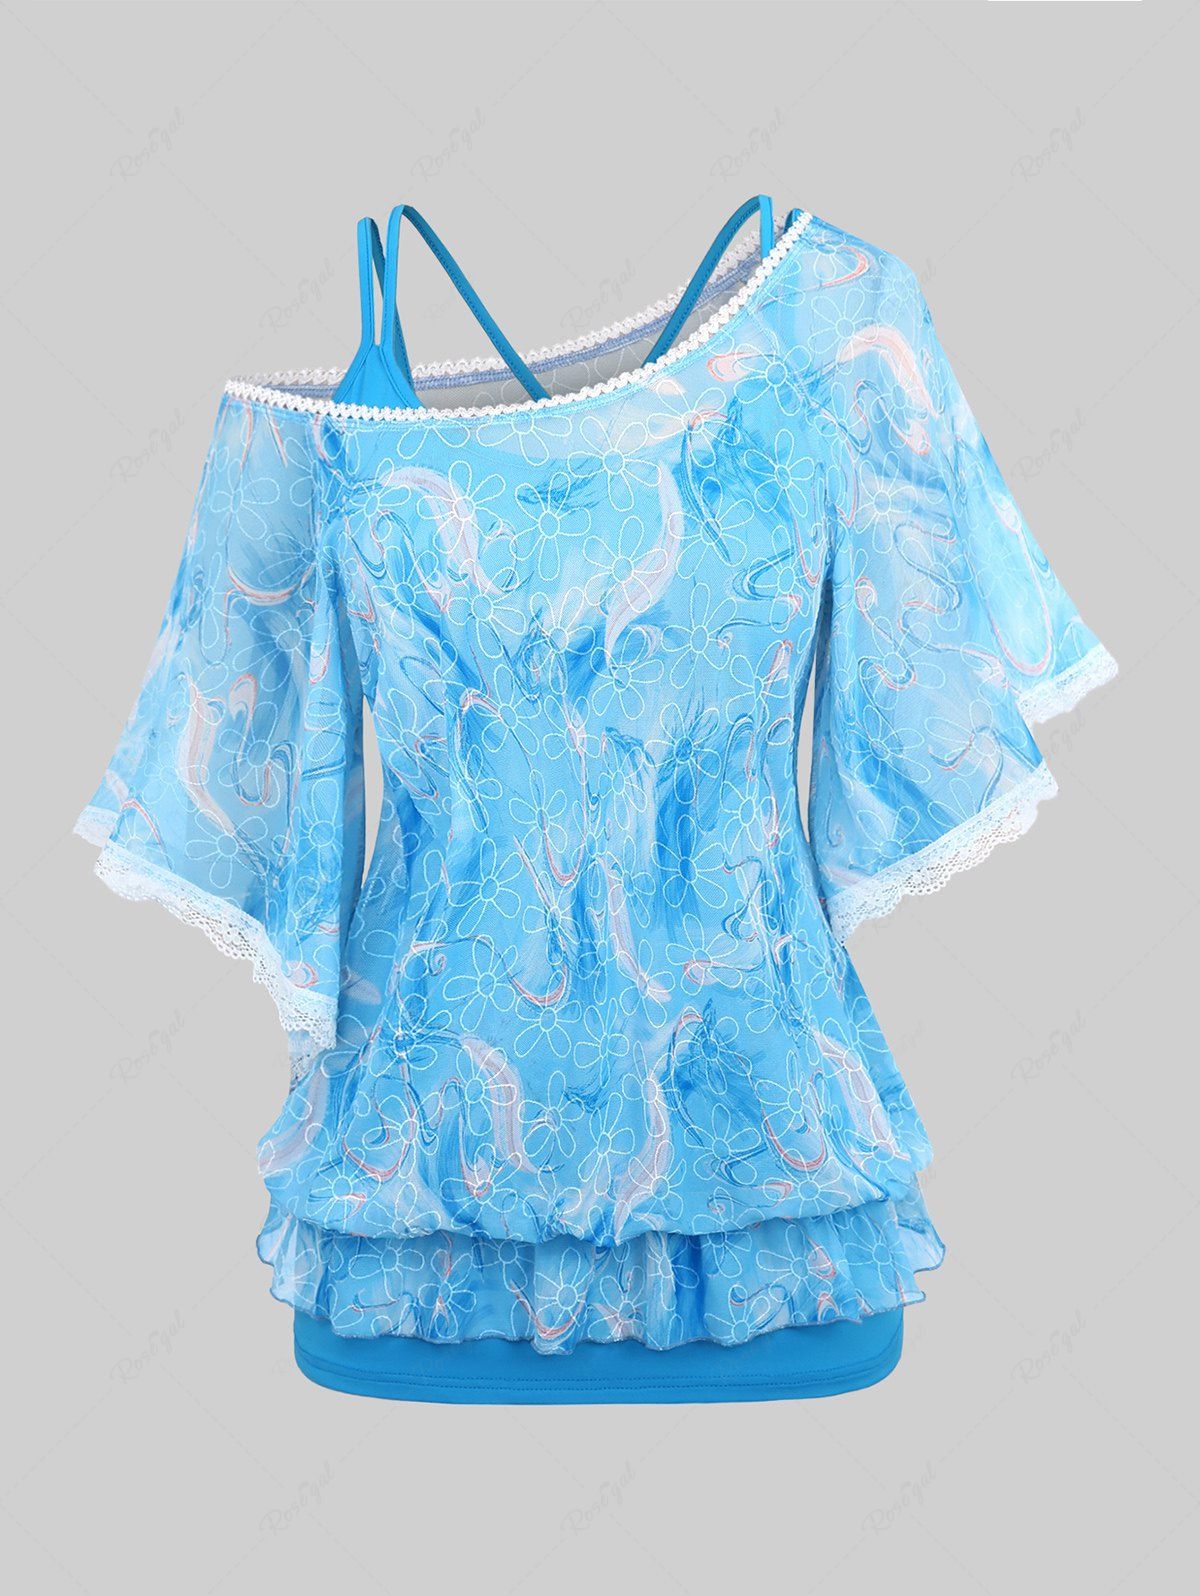 Shops Plus Size Solid Crisscross Cami Top and Skew Neck Flutter Sleeves Lace Trim Floral Feather Print Mesh Ruffles Layered T-shirt Set  